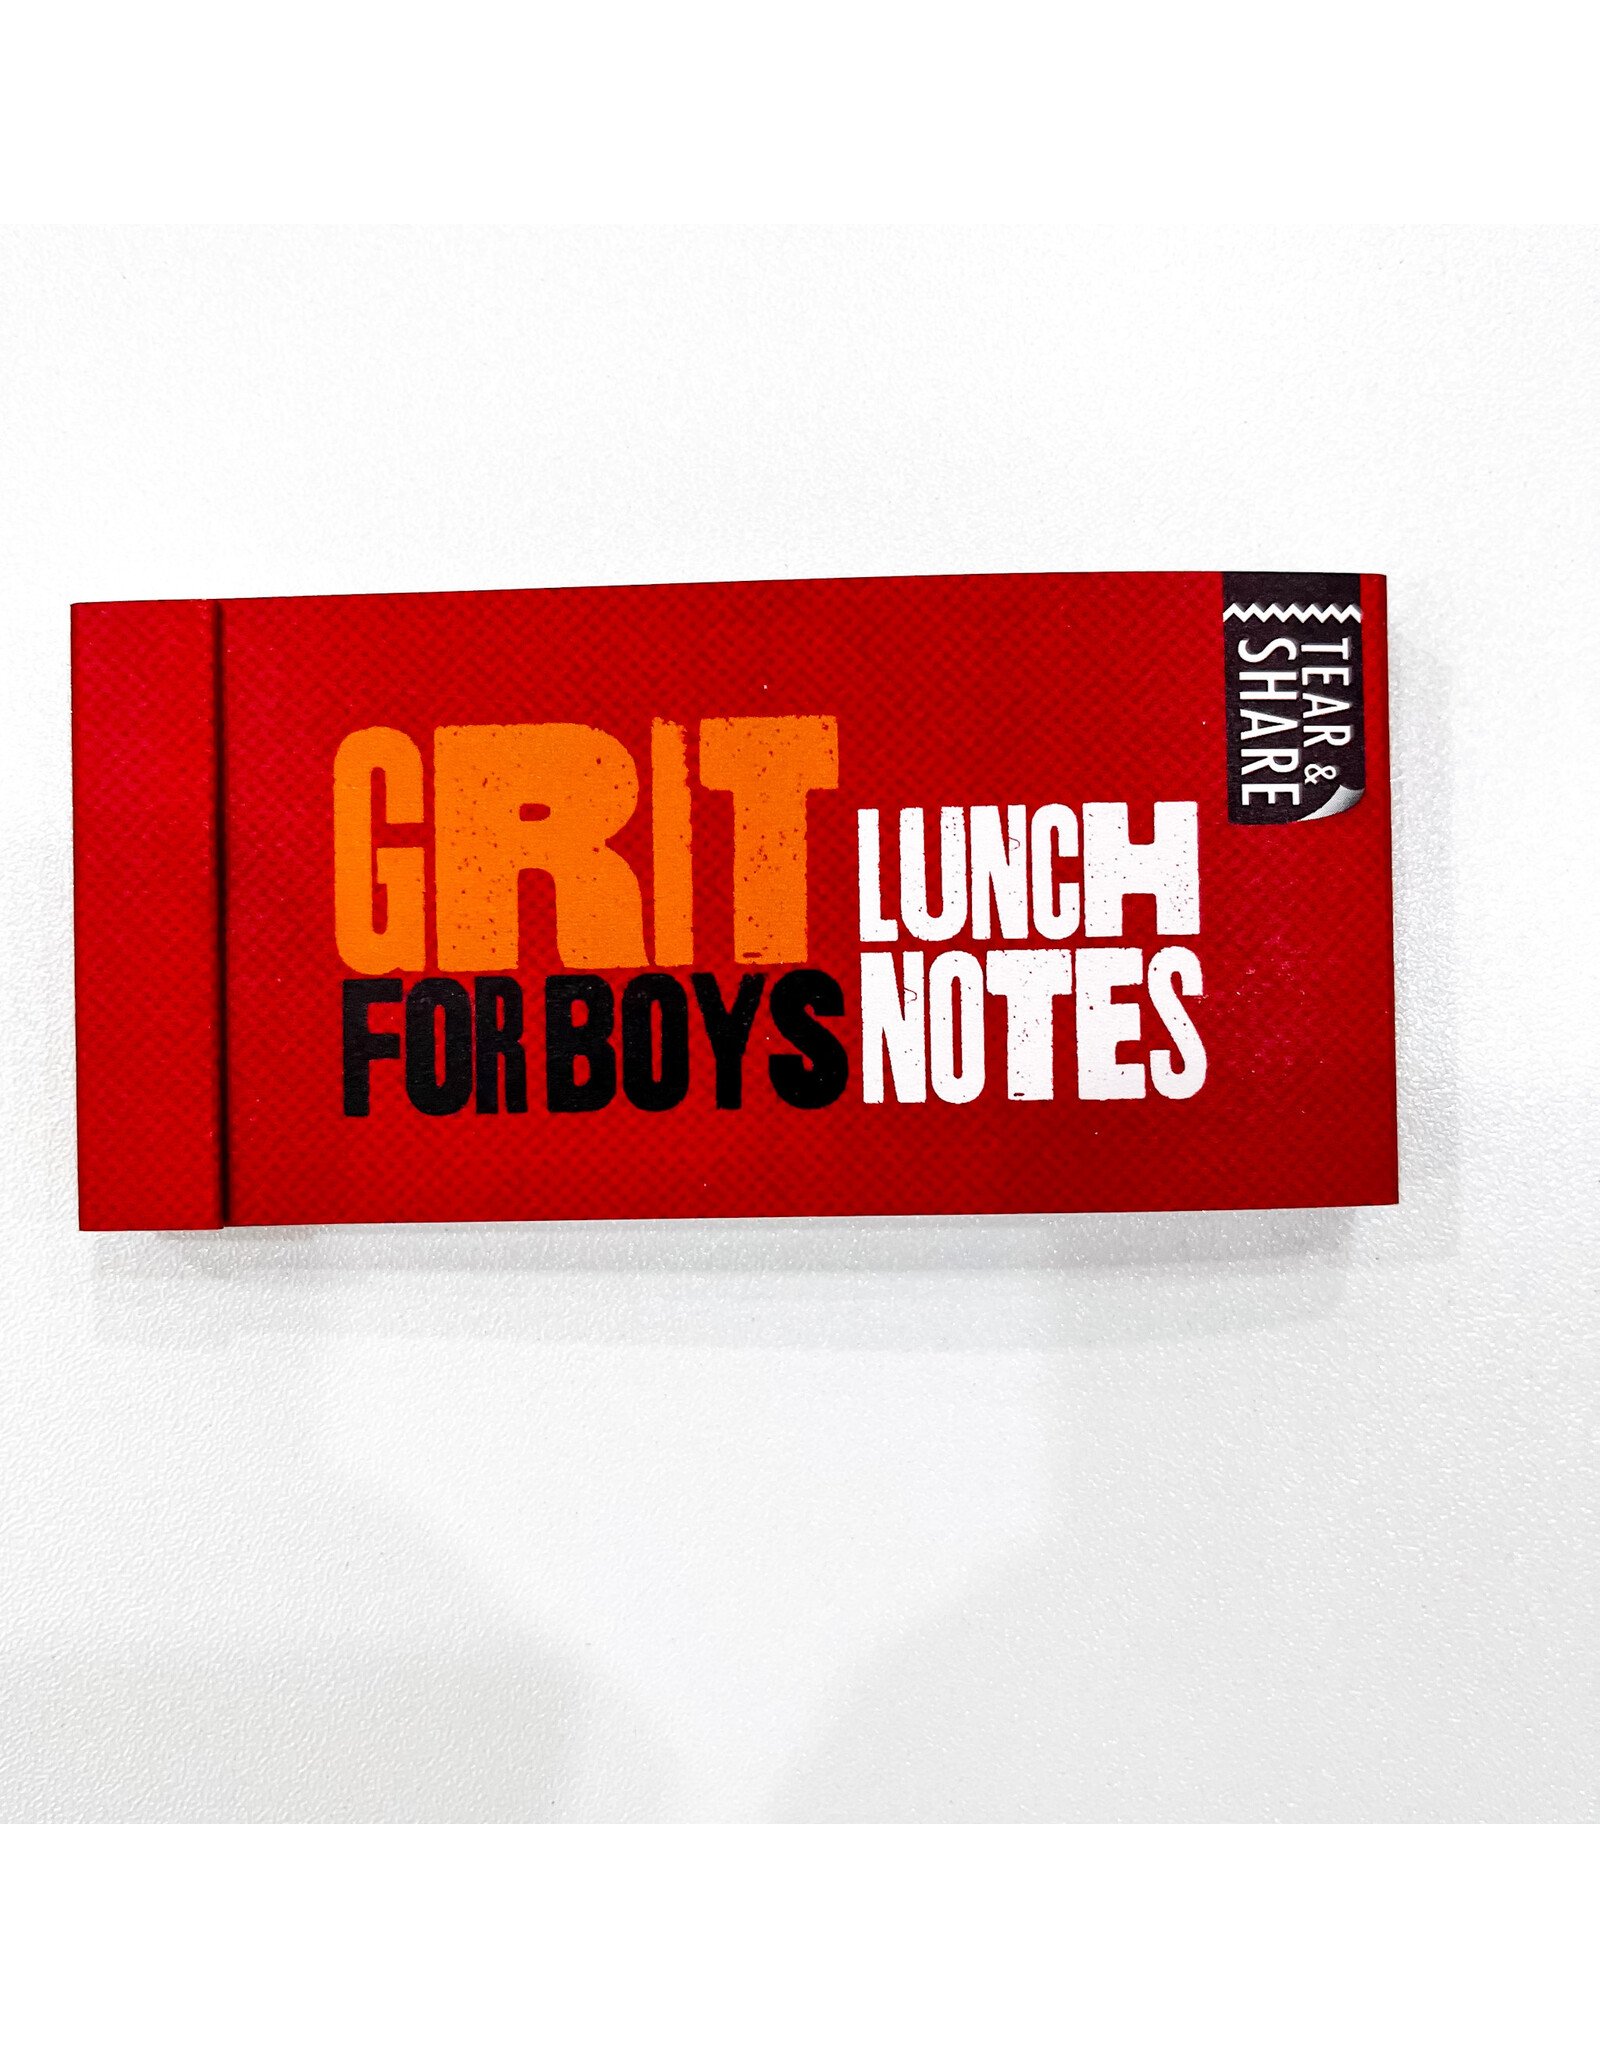 Lunch Notes - Grit for Boys